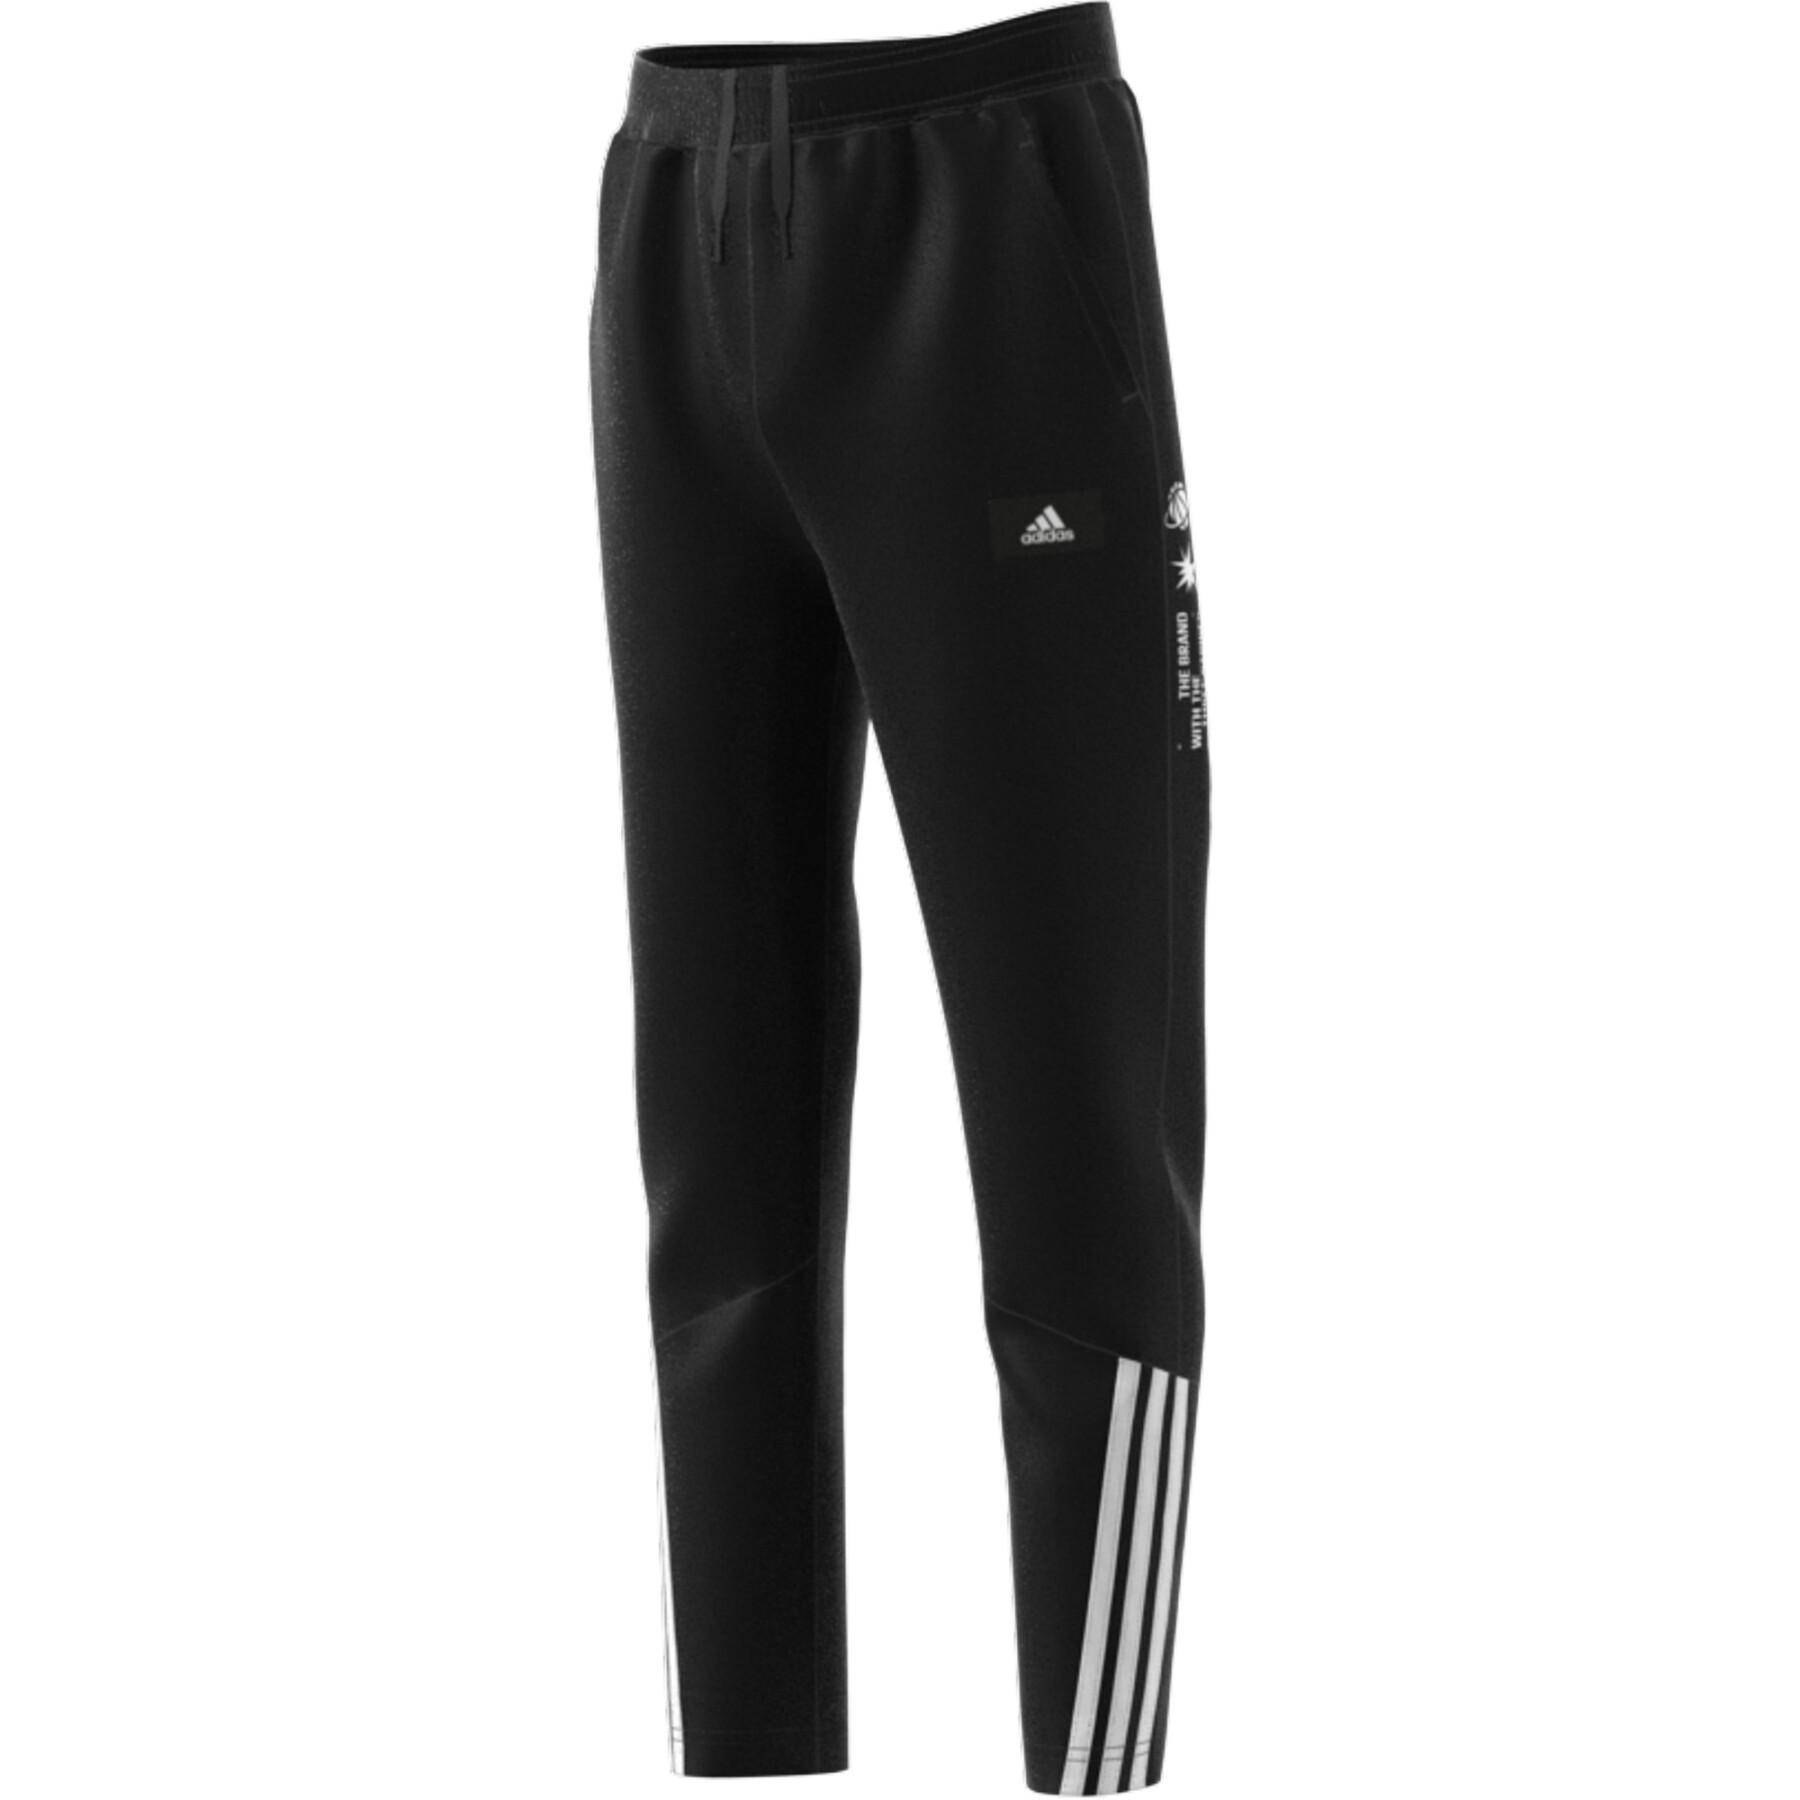 Children's trousers adidas ARKD3 Warm Woven 3-Stripes Tapered